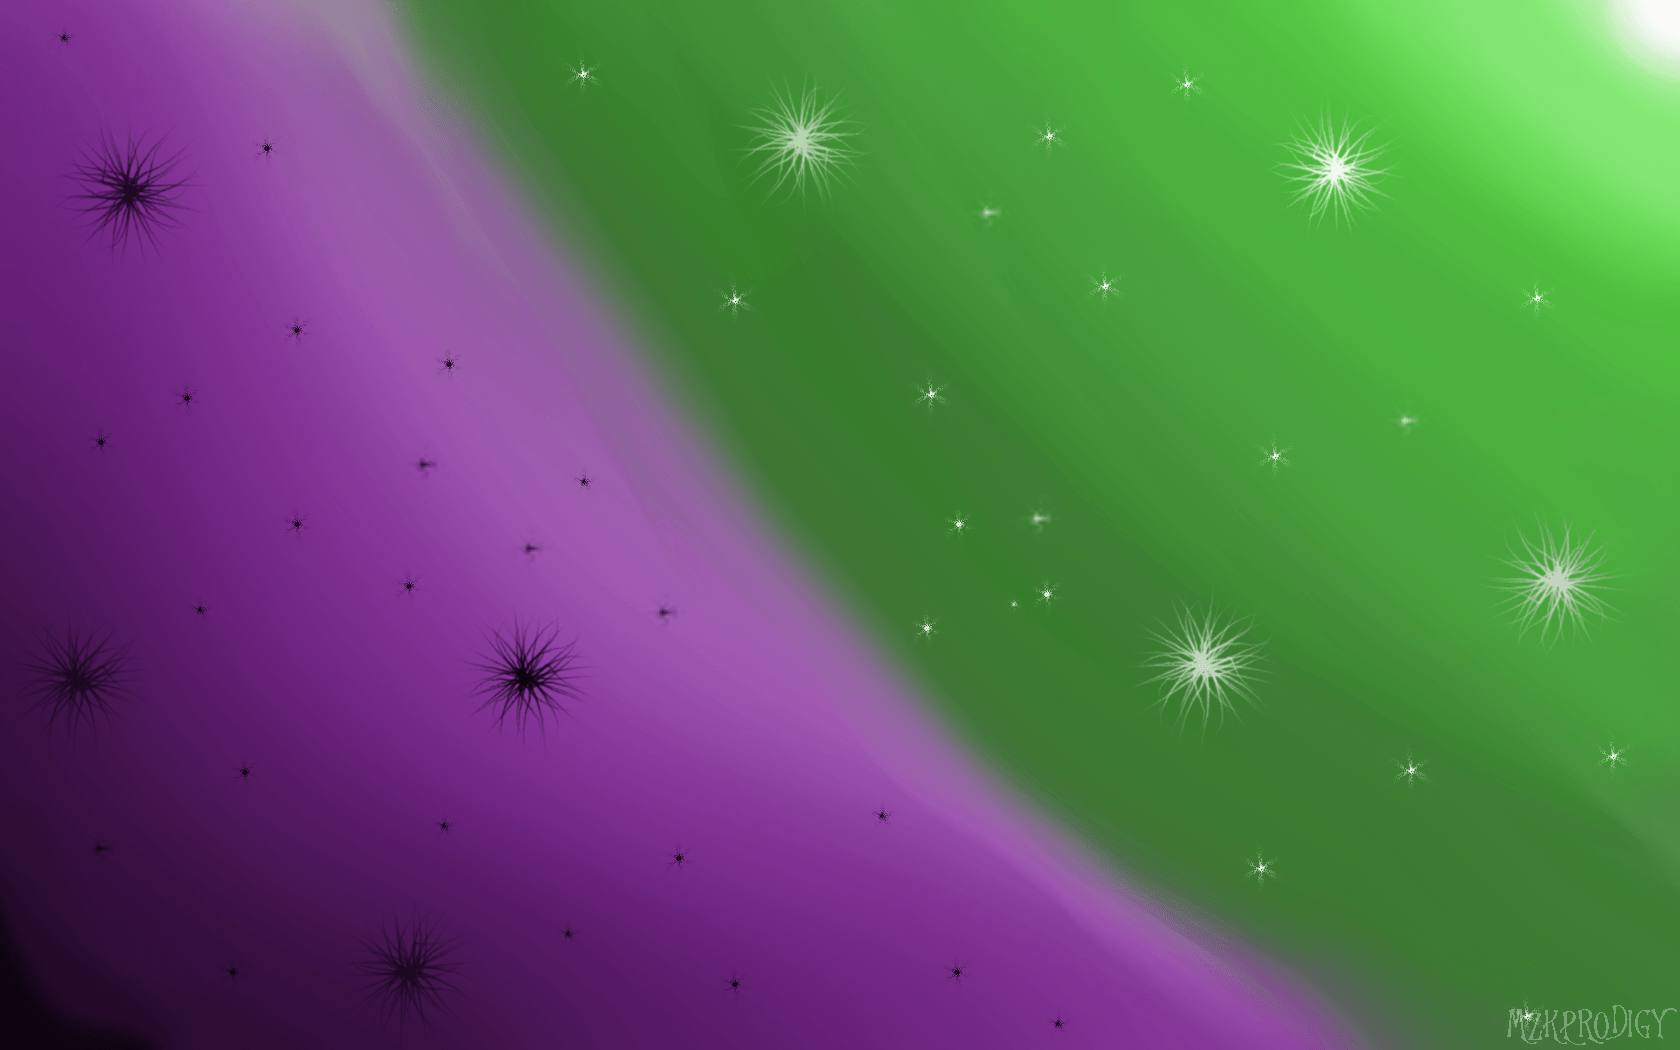 Simple abstract wallpaper green and purple sky